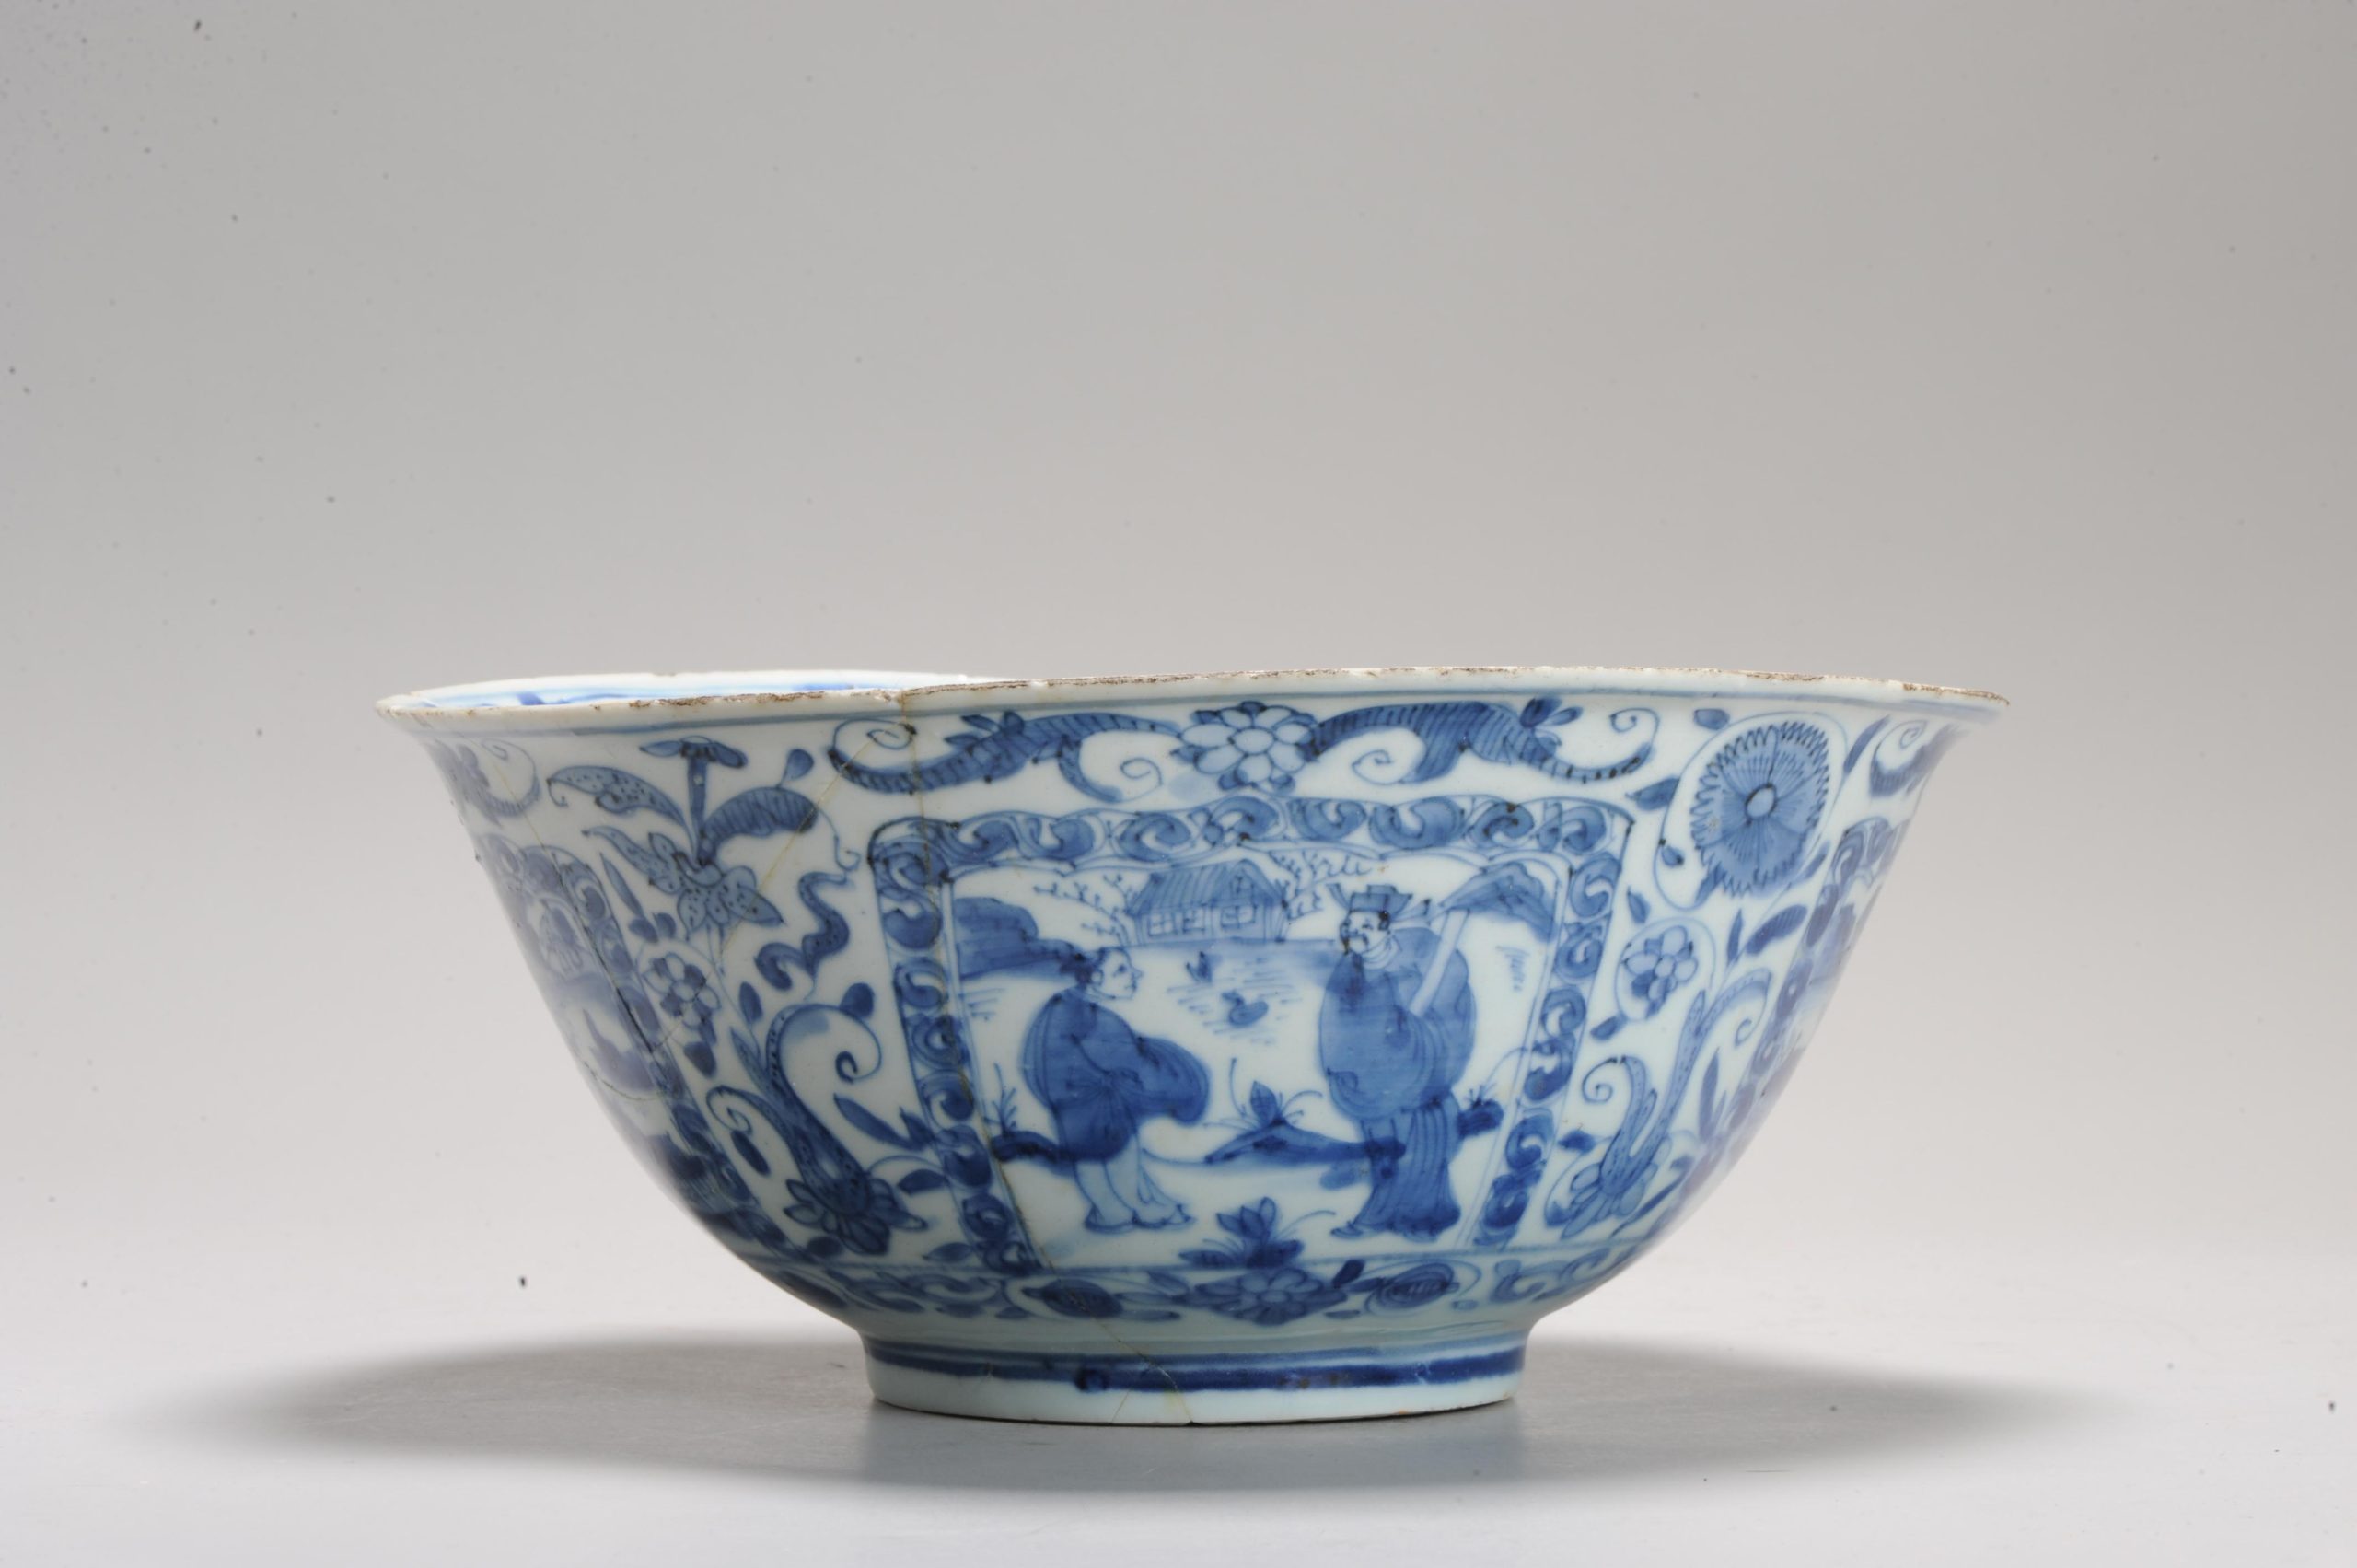 Antique Ming/Transitional Chinese Porcelain Kraak Bowl with European Scenes Flowers